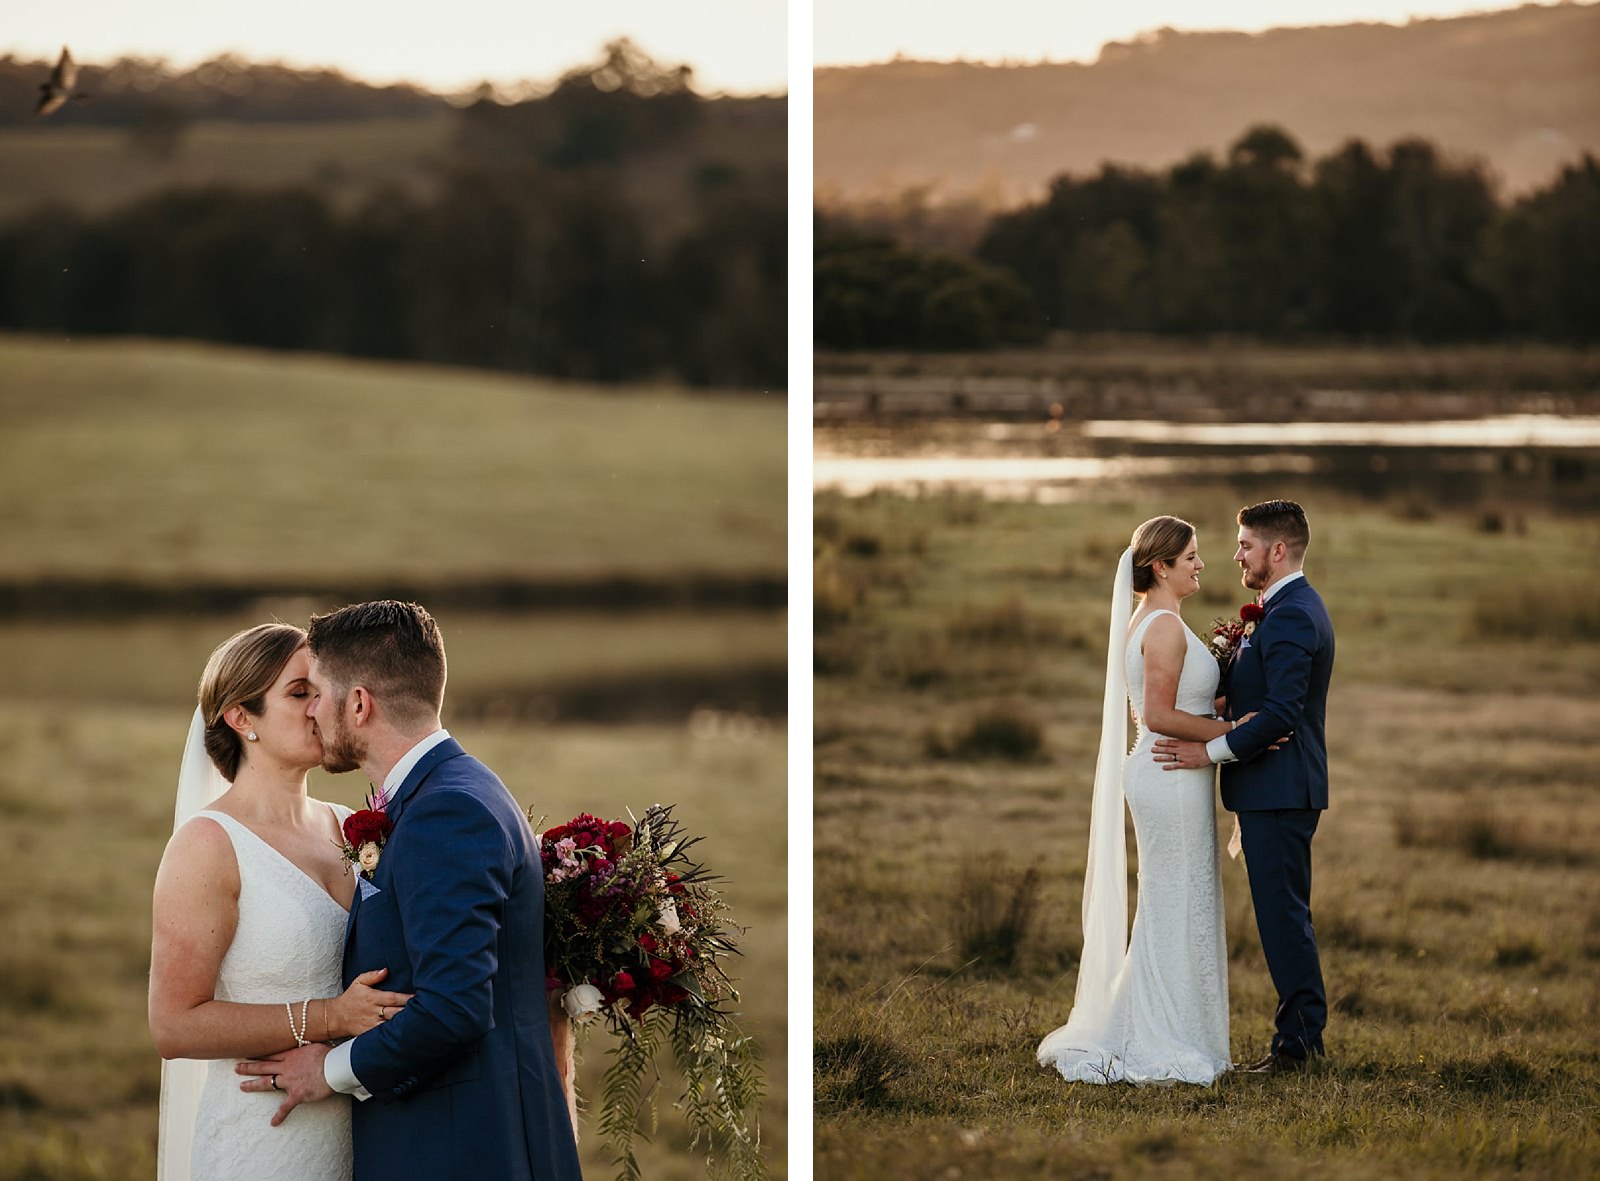 097Hunter Valley Wedding Photographers Bryce Noone Photography at Tocal Homestead Wedding Venue.jpg